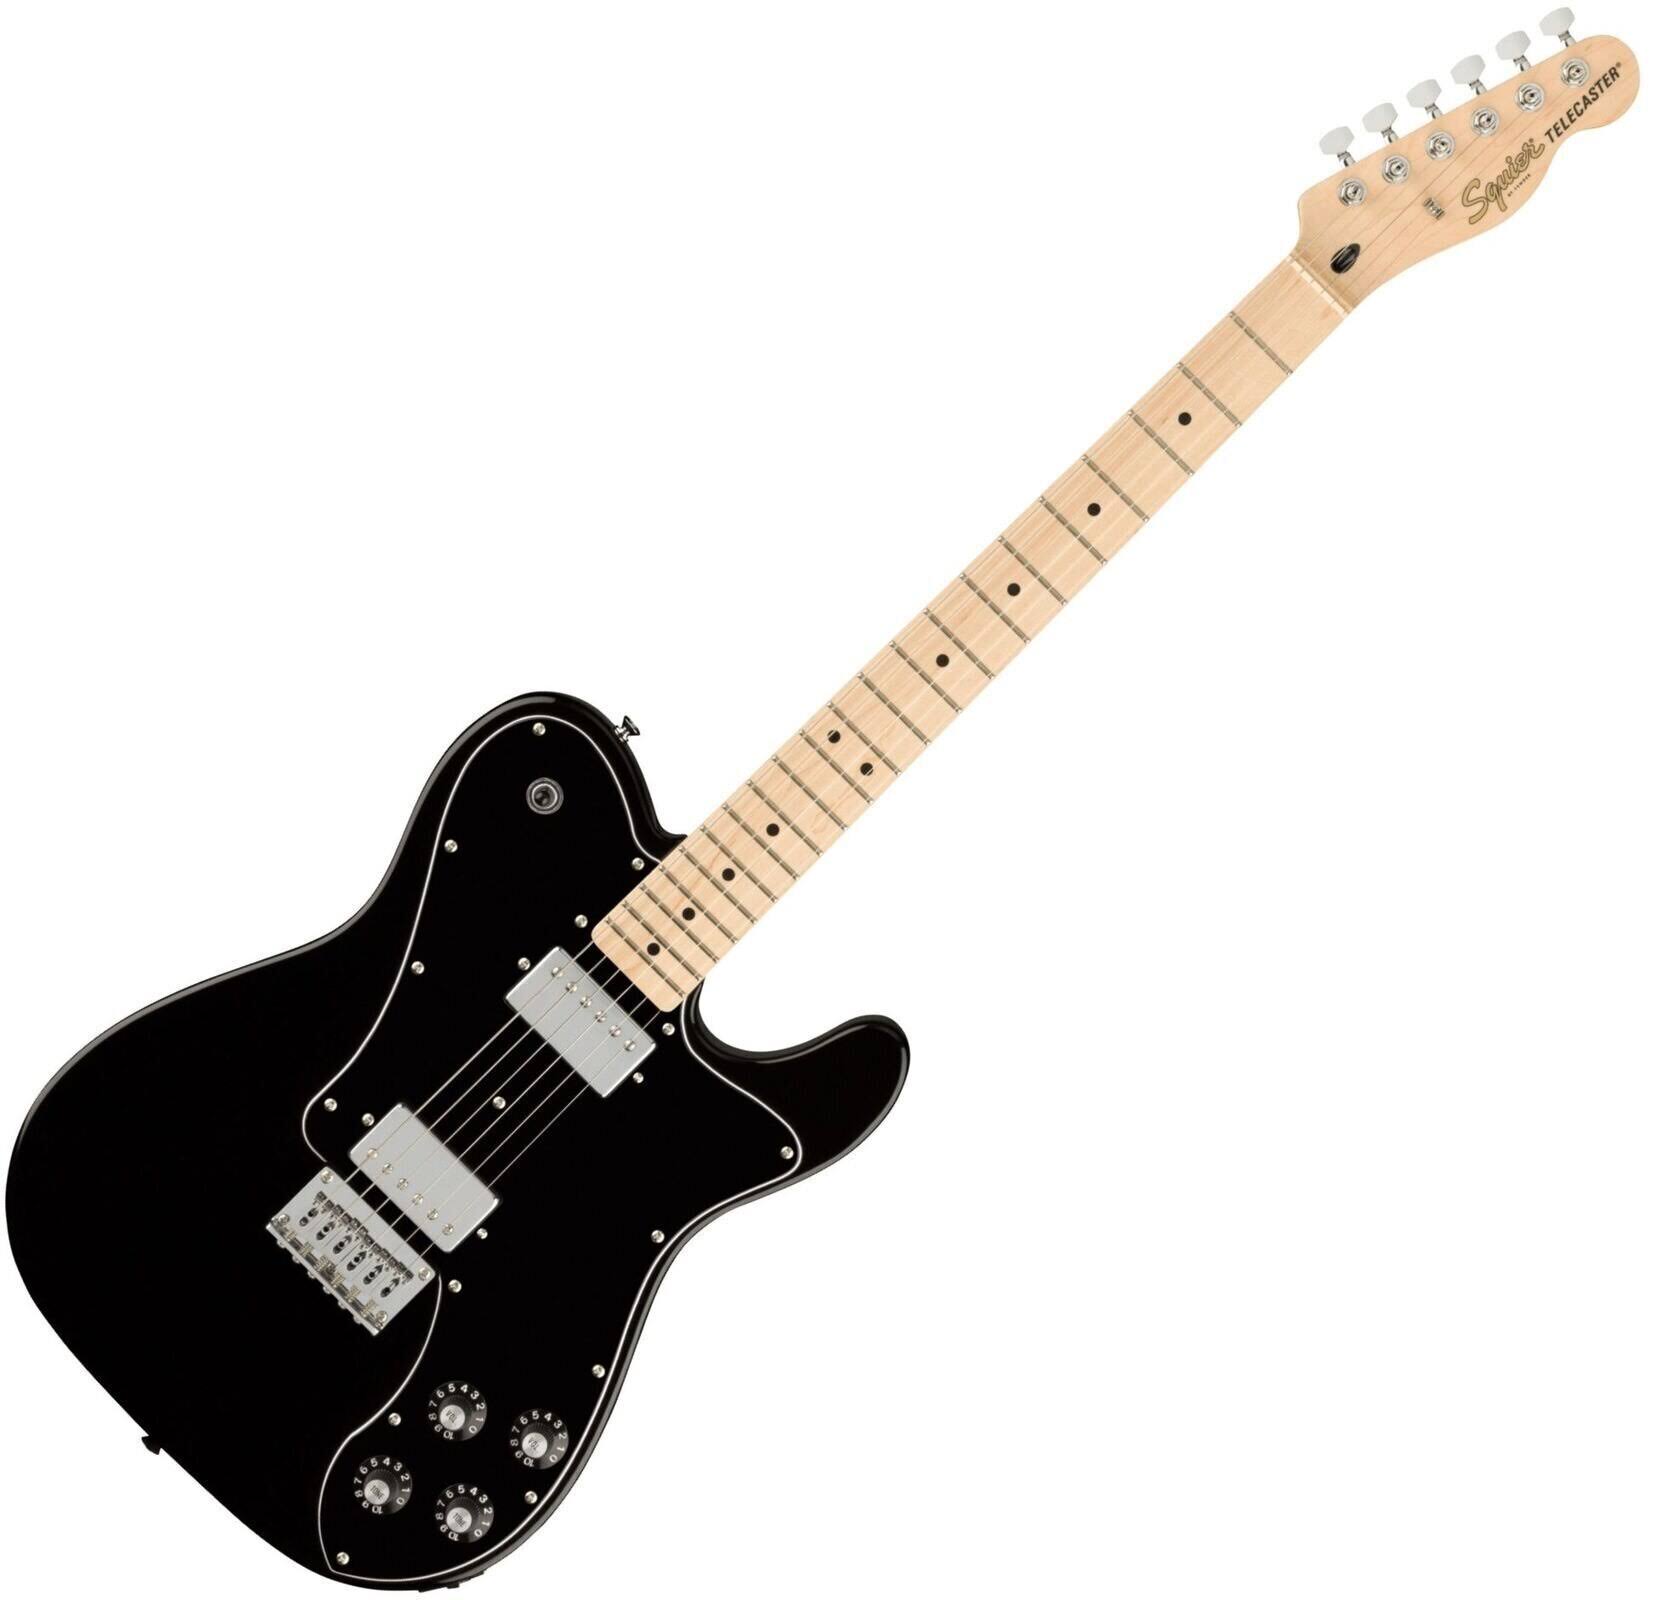 Squier Affinity Series Telecaster Deluxe MN Black - Electric Guitar